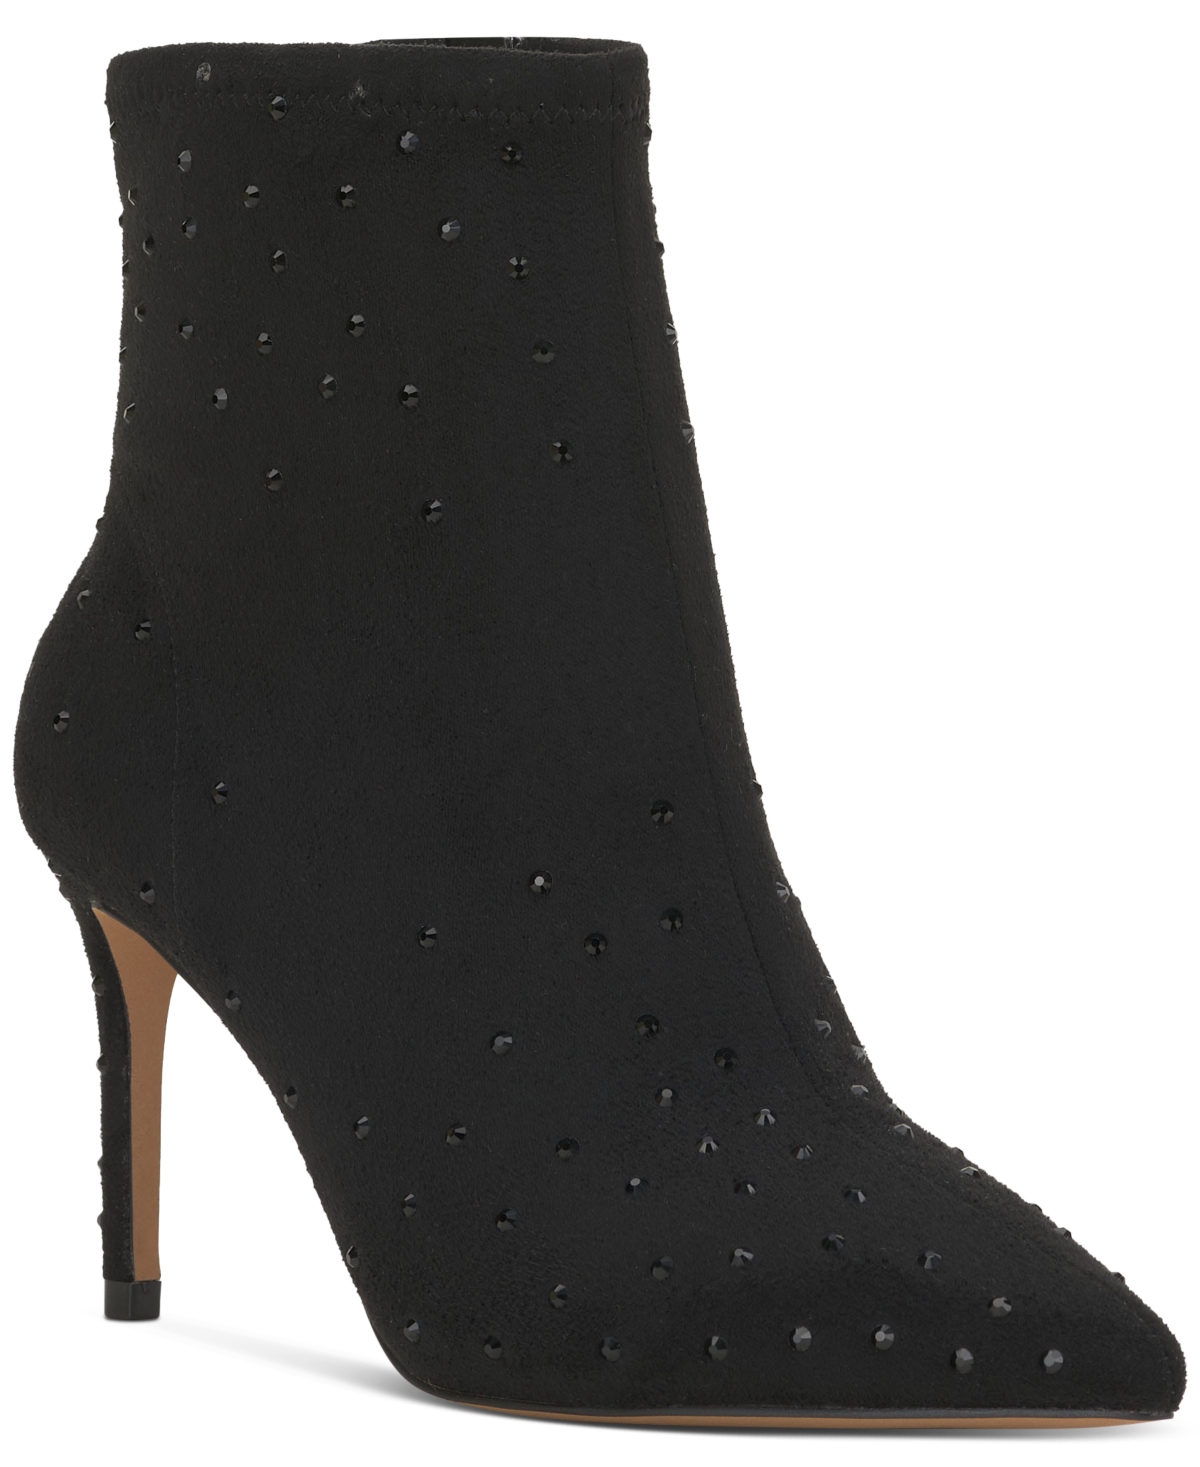 Women's Semaja Pointed Toe Ankle Boots - Black Microsuede